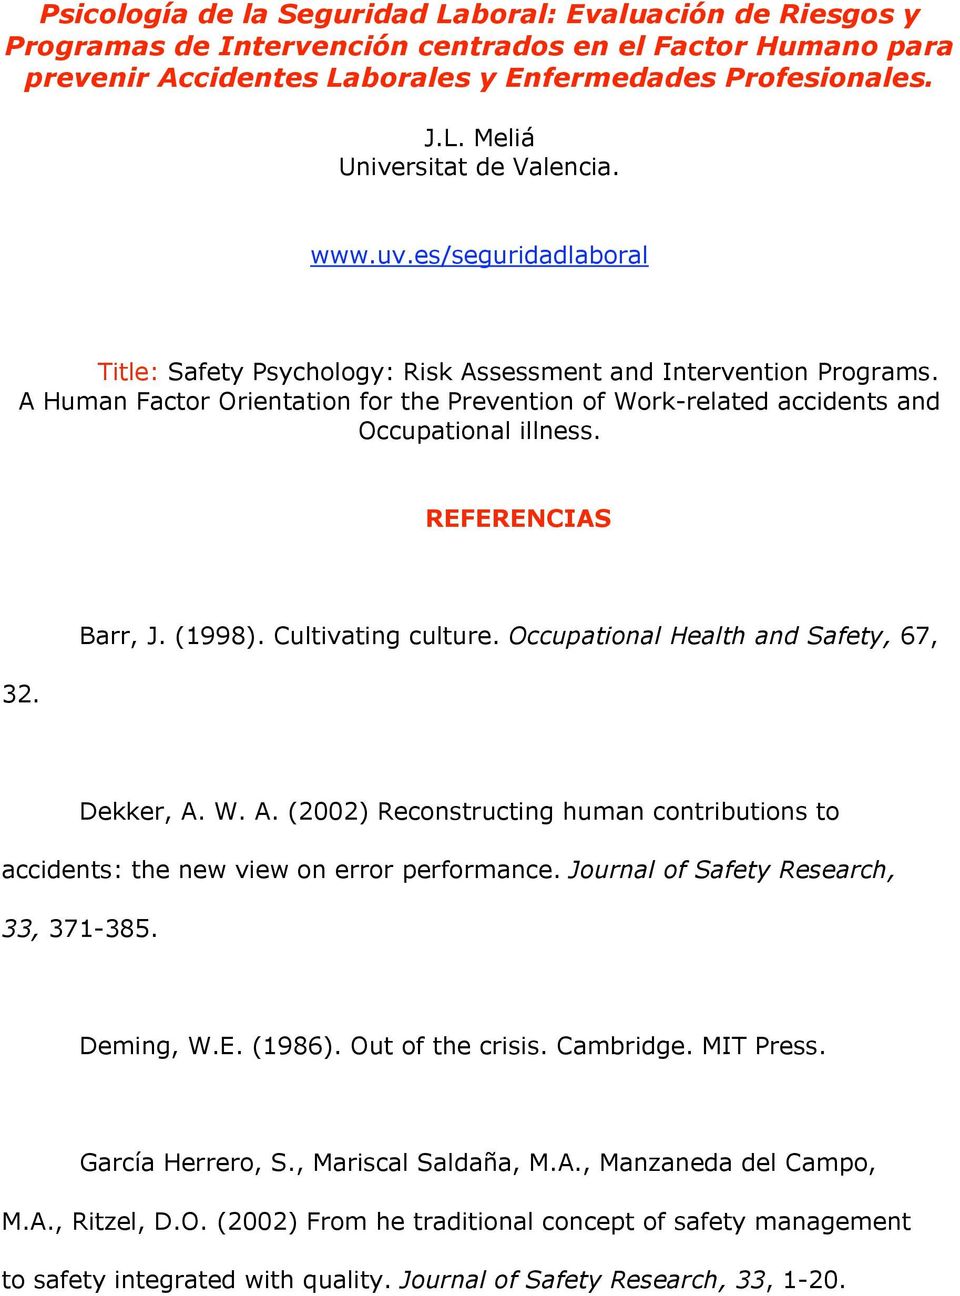 REFERENCIAS 32. Barr, J. (1998). Cultivating culture. Occupational Health and Safety, 67, Dekker, A. W. A. (2002) Reconstructing human contributions to accidents: the new view on error performance.